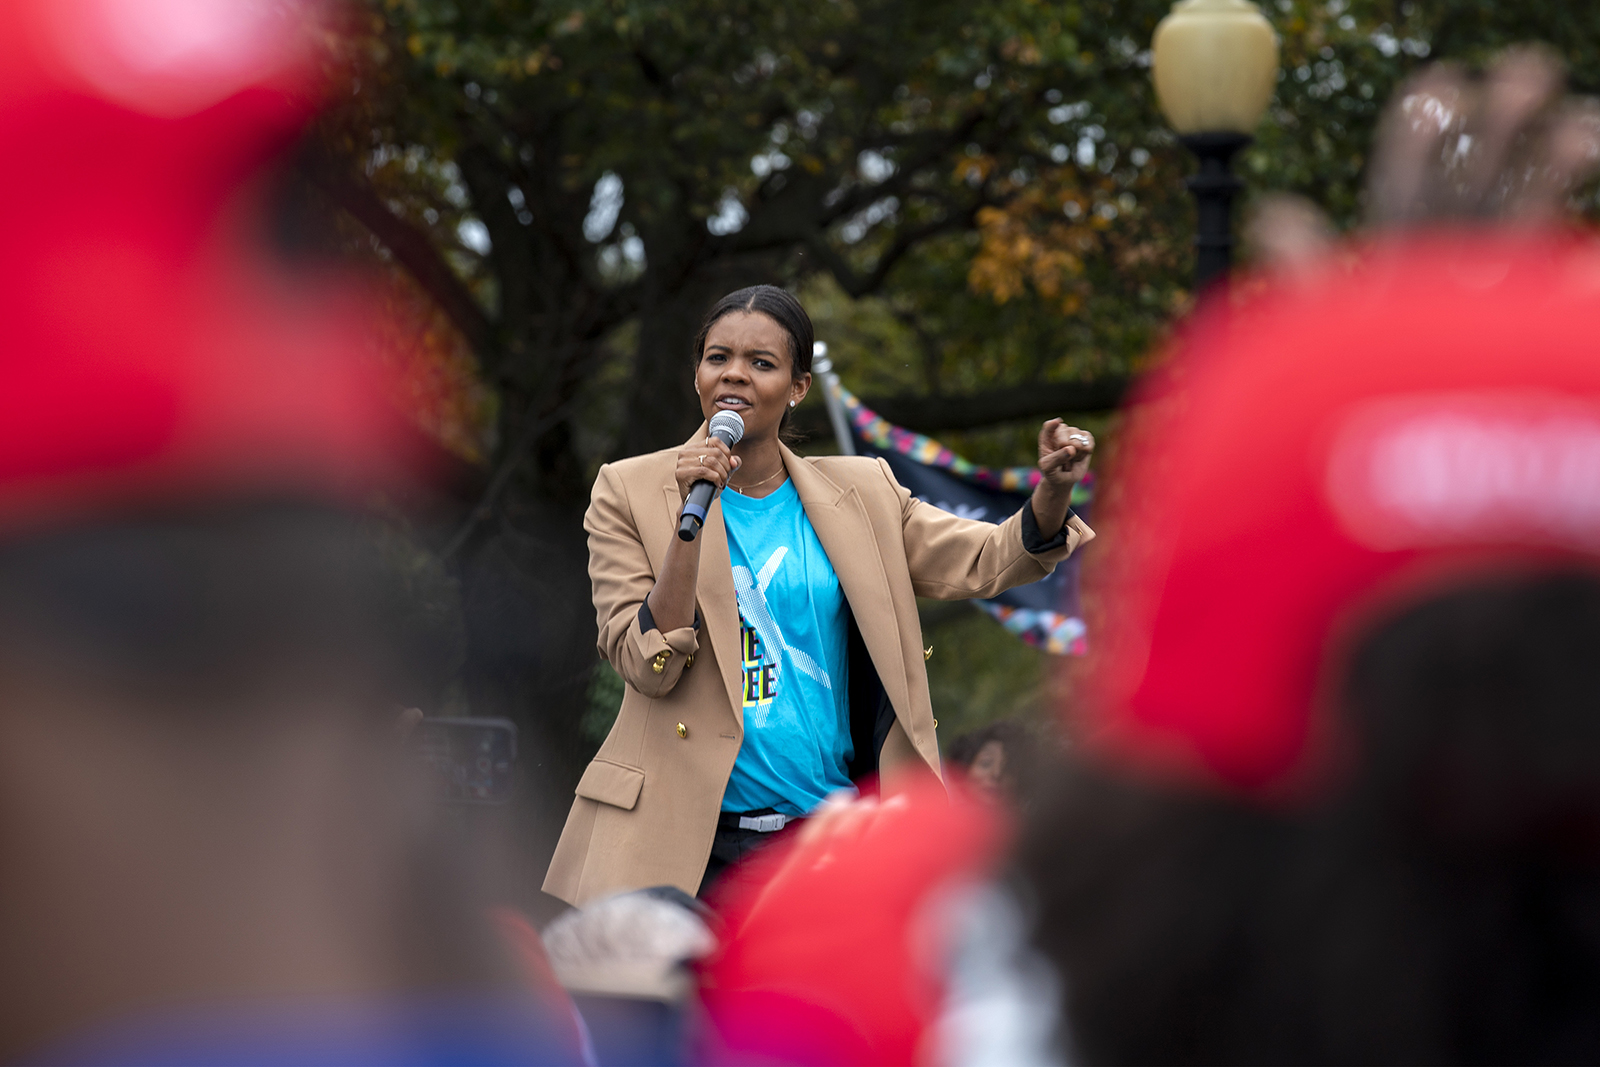 Conservative commentator and political activist Candace Owens speaks at a rally about the ellipsis at the White House on Saturday, Oct. 10, 2020, in Washington.  (AP Photo/Jose Luis Magana)